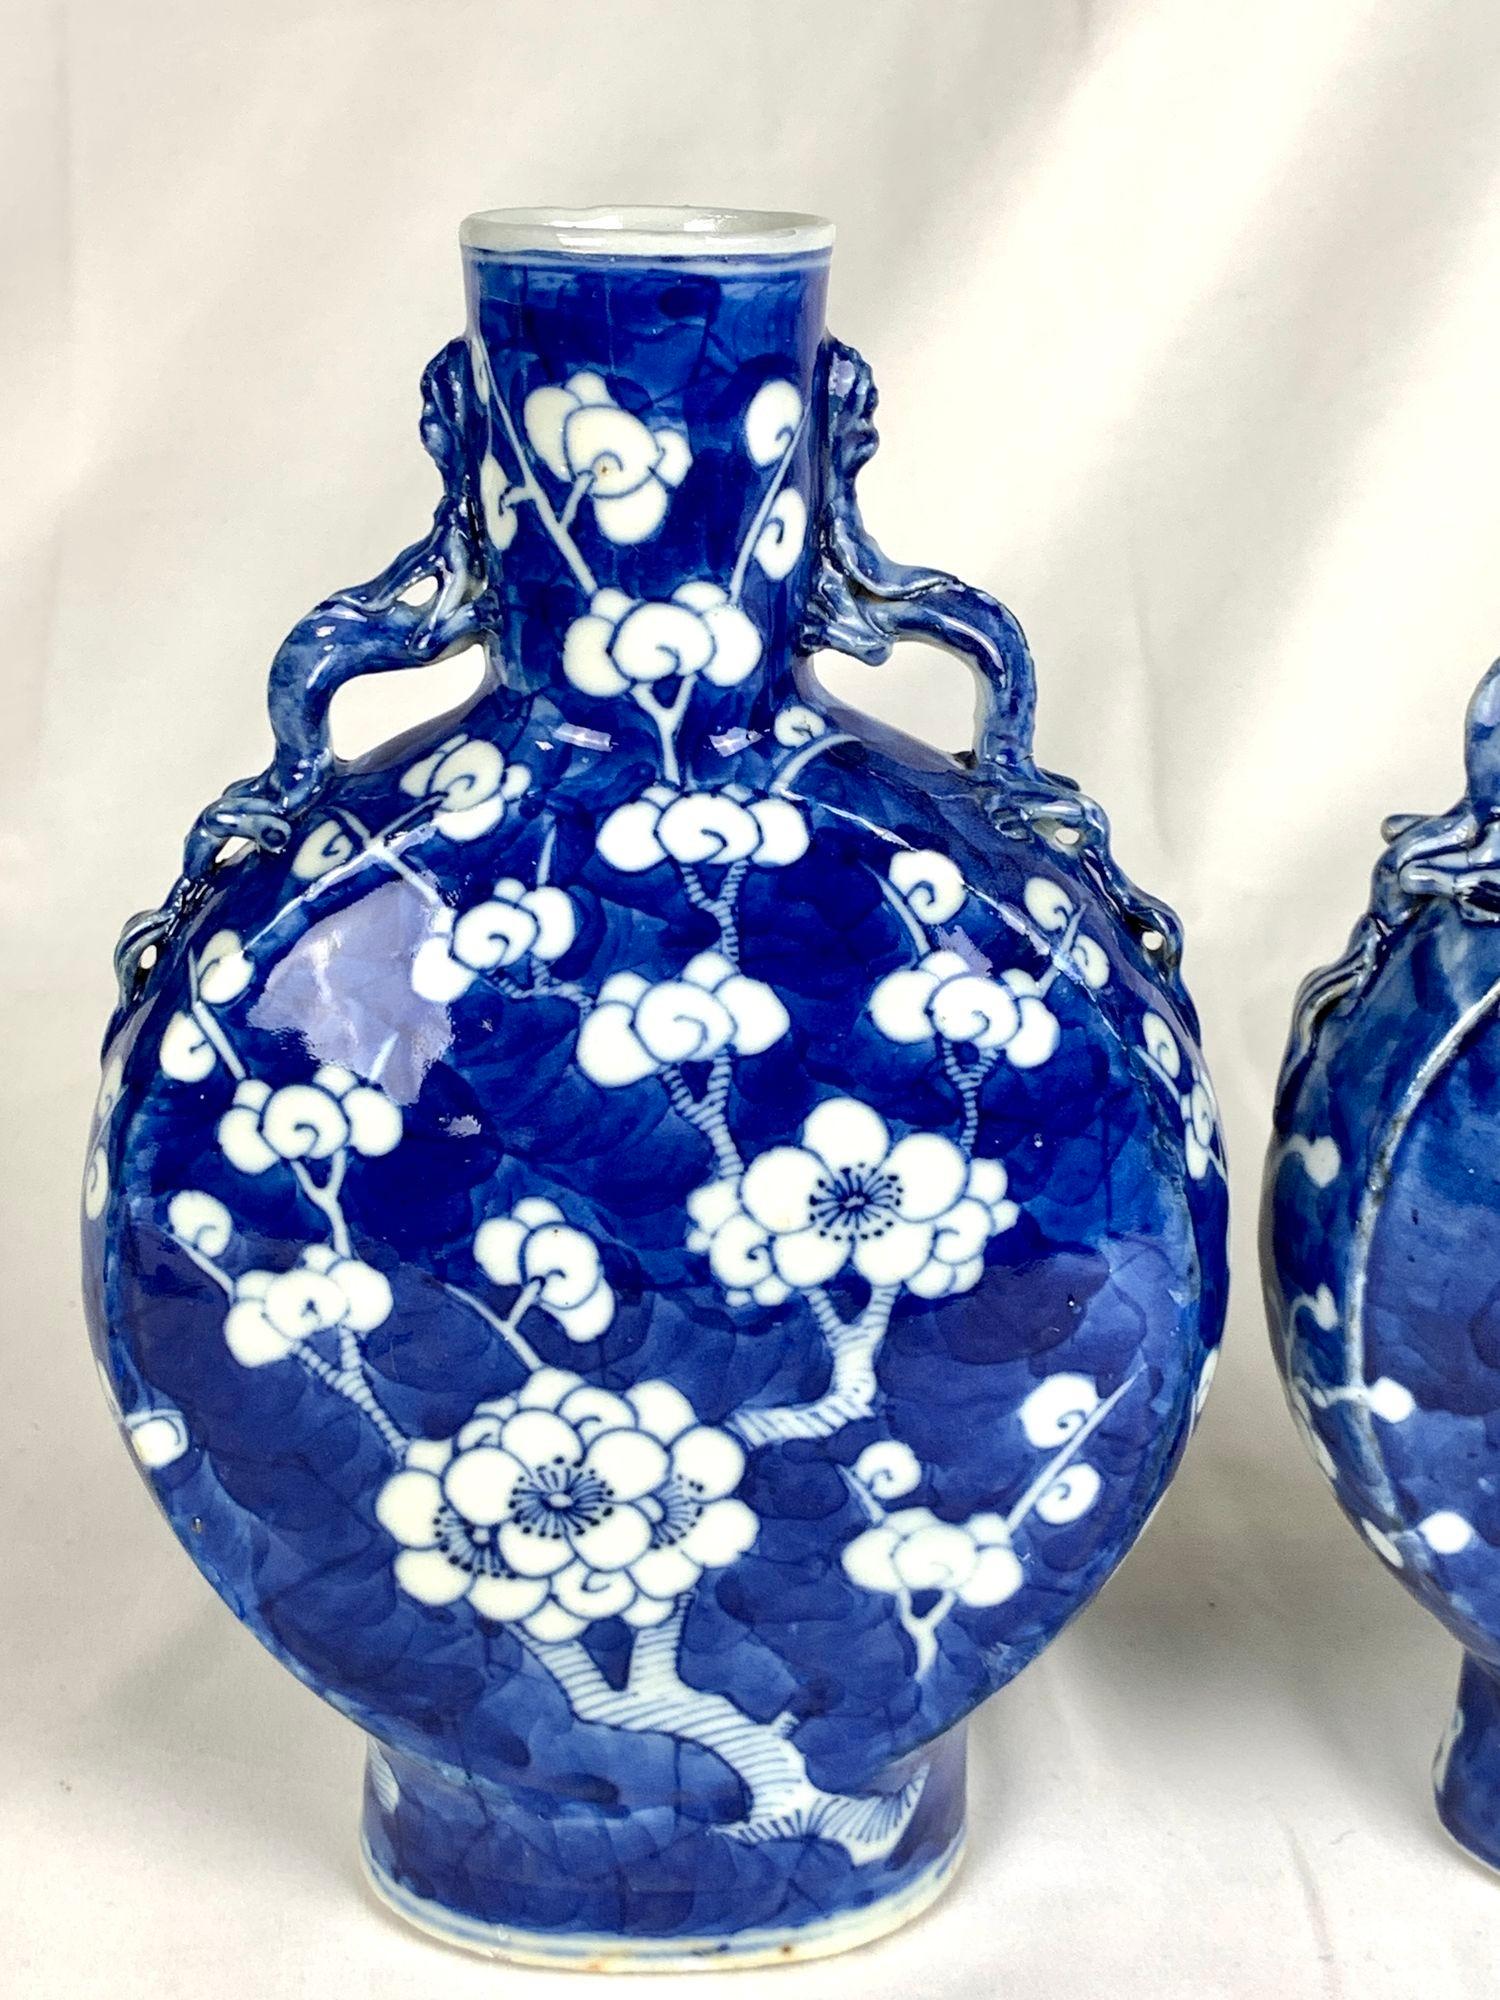 This pair of Chinese porcelain moon flasks are hand painted with lovely white plum blossom flowers on a deep cobalt blue ground.
They were made in the late 19th century during the Qing Dynasty transitional Guangxu period, circa 1880.
The harmonious